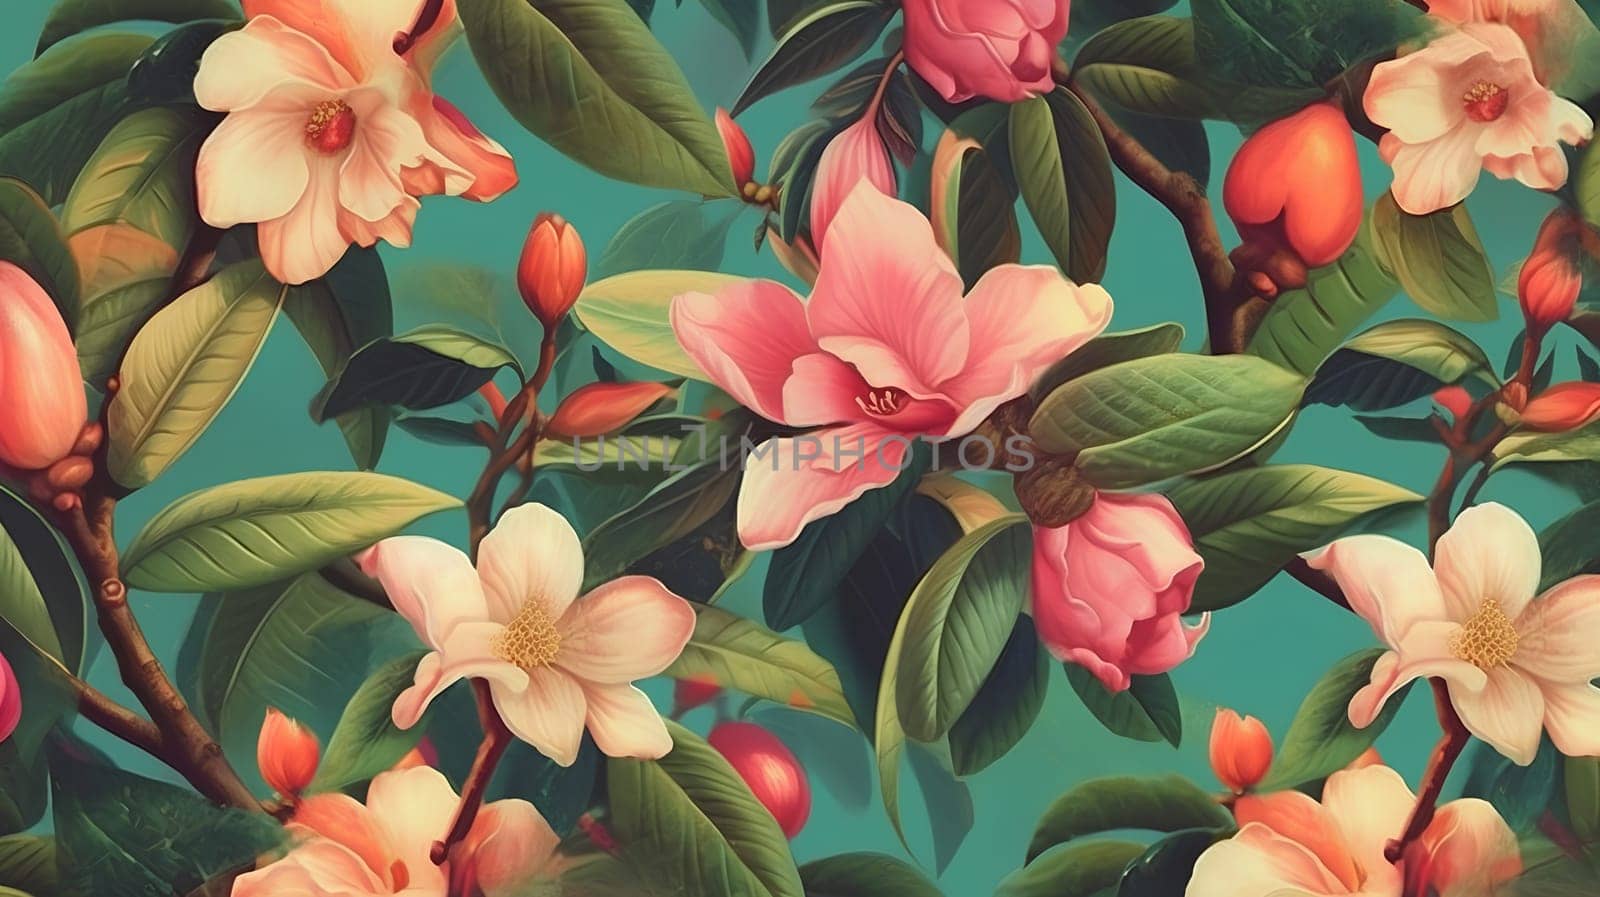 colored flowers illustration - decorative background by chrisroll